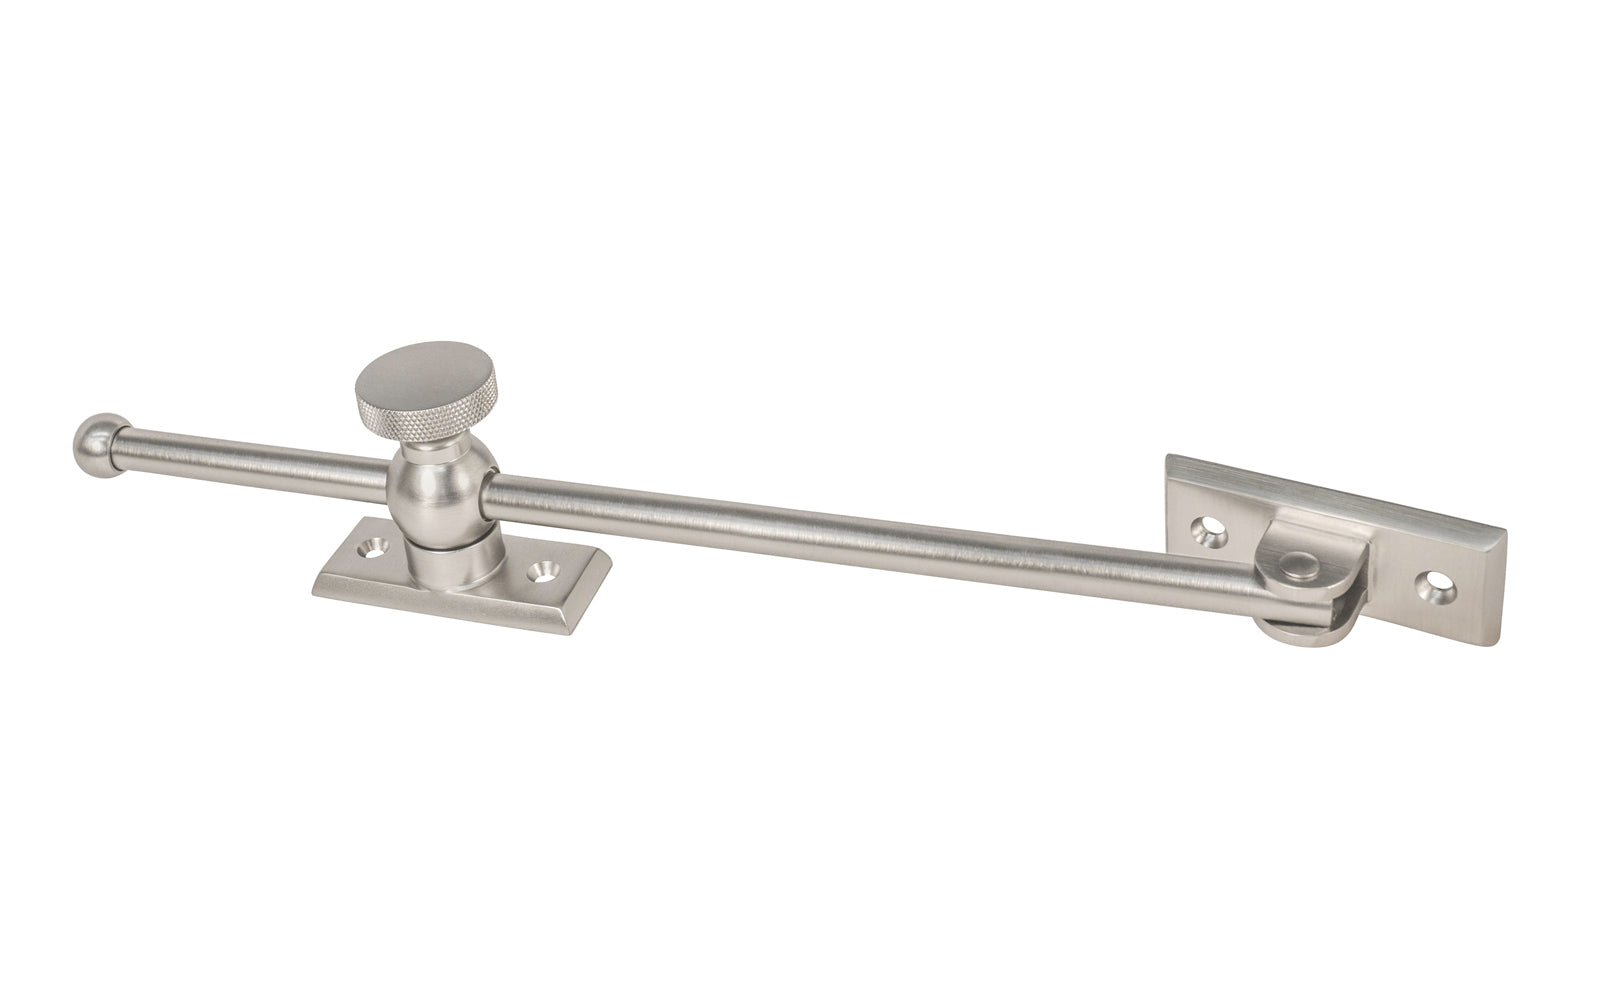 Vintage-style Classic & Premium Solid Brass Casement Adjuster Stay ~ 10" Length. For securing outswing casement windows. It has a durable pivot turn with a knurled knob for smooth & secure operation. Brushed Nickel Finish